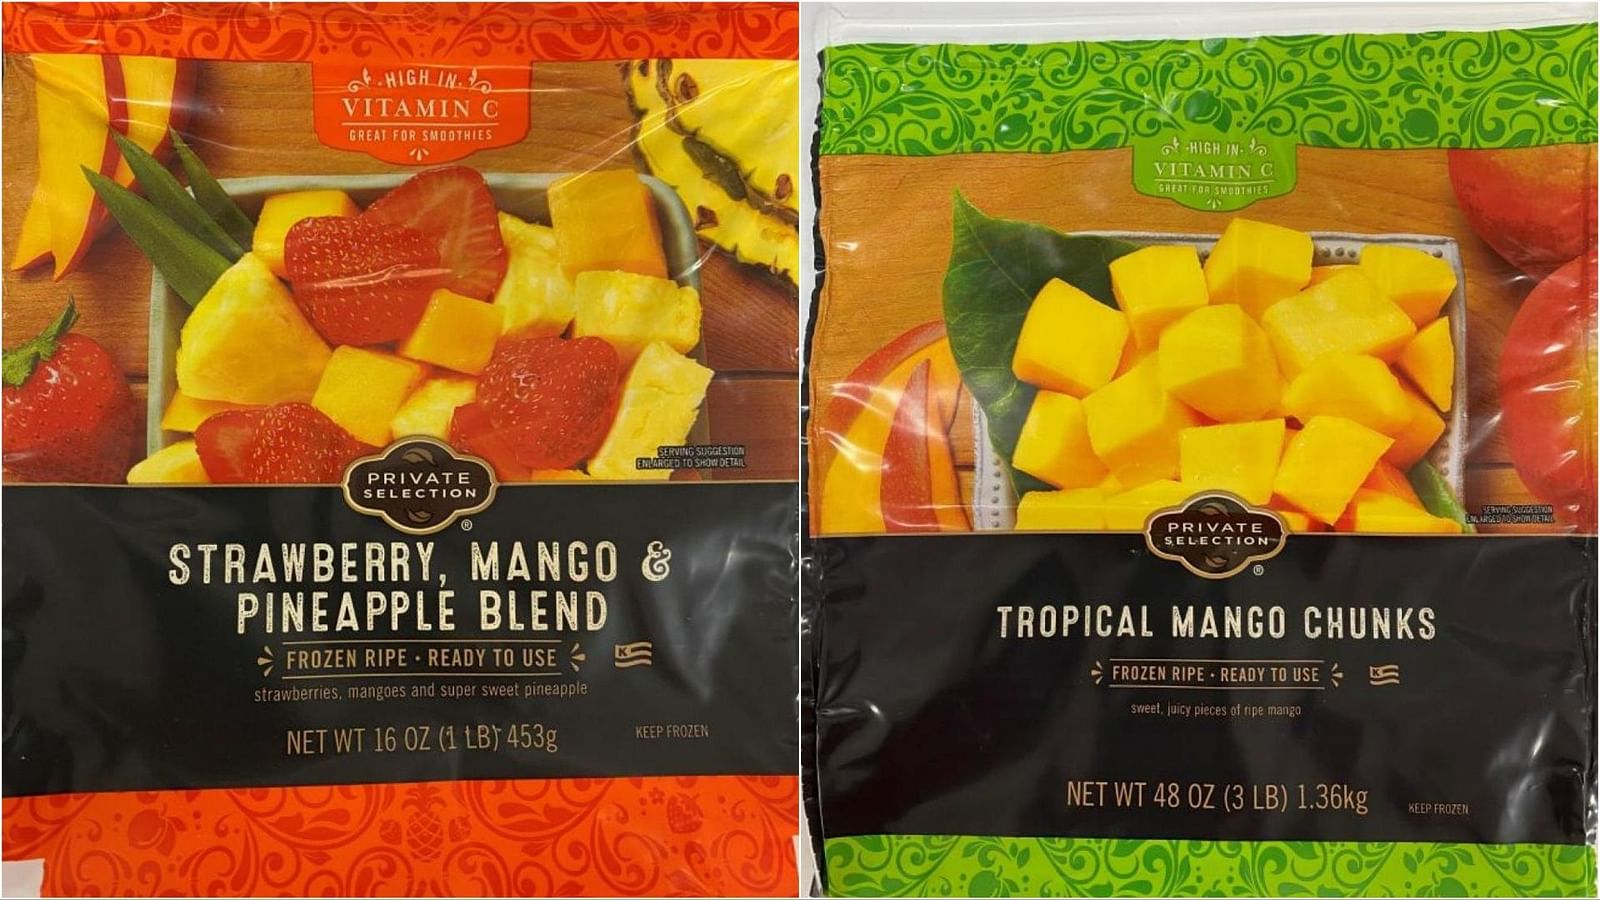 Townsend Farms Frozen Fruits recall Reason, affected items, date codes